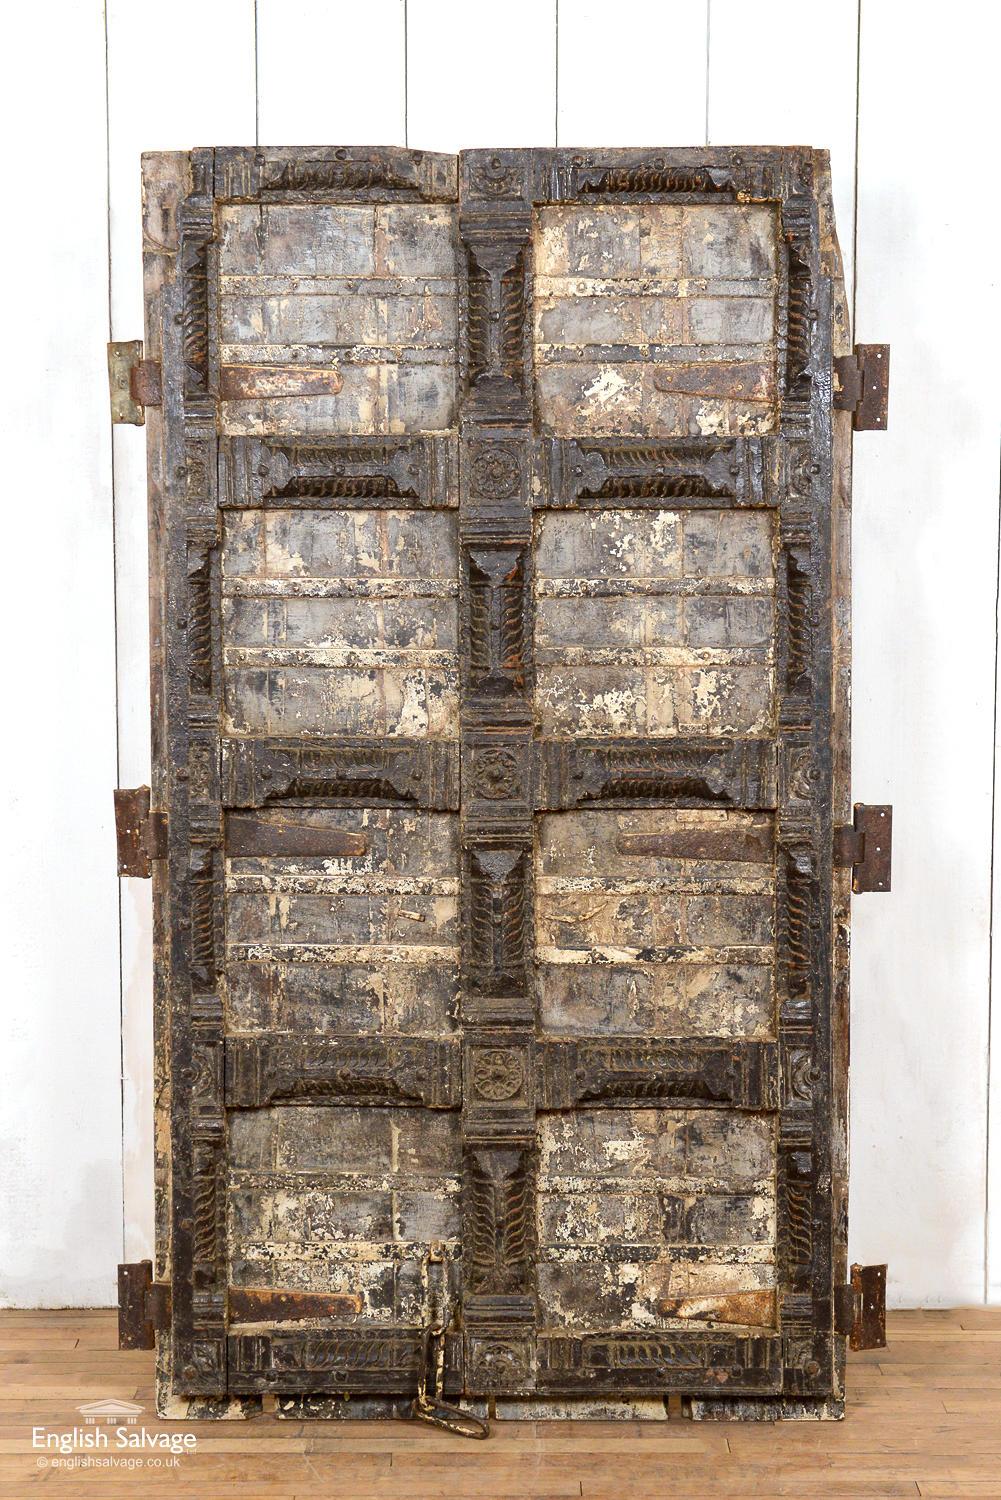 A set of heavy paneled teak doors from Gujarat state in India. Lovely carvings to the door fronts. Very weathered/scuffed paintwork. Reinforced with metal straps. The rear side of the doors are plain with a simple chain lock. There are some splits